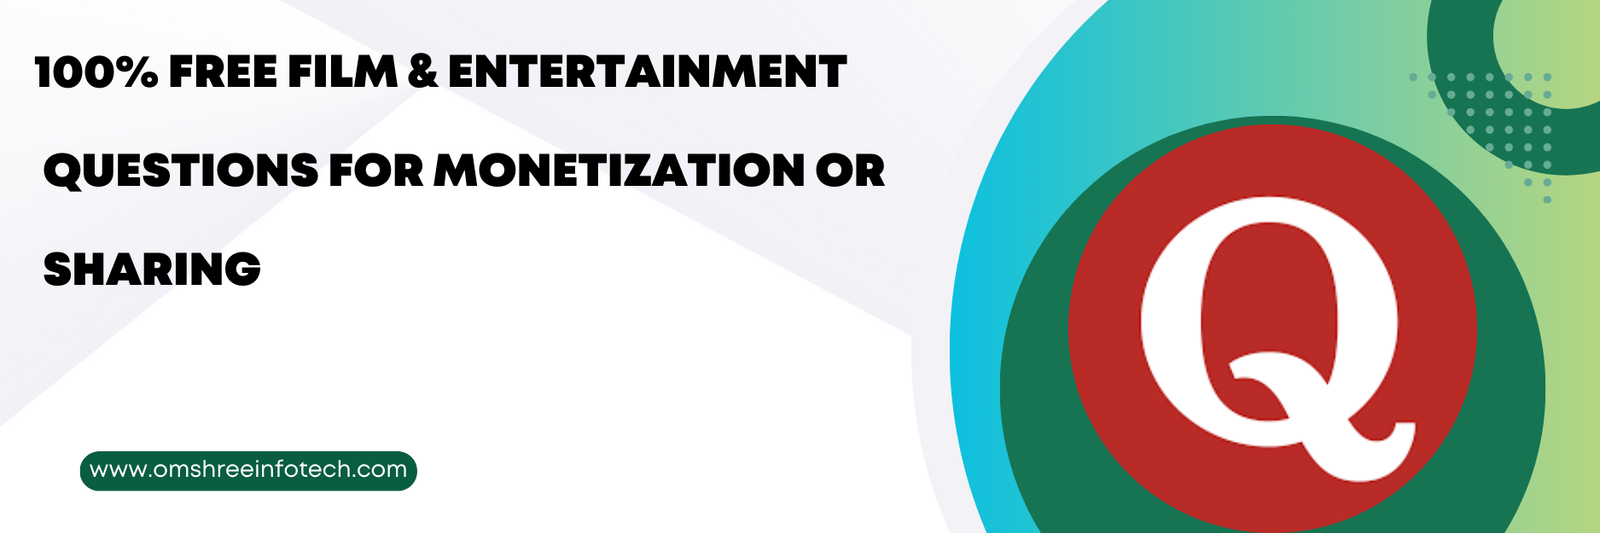 100% Free Film & Entertainment Quora Questions for Monetization